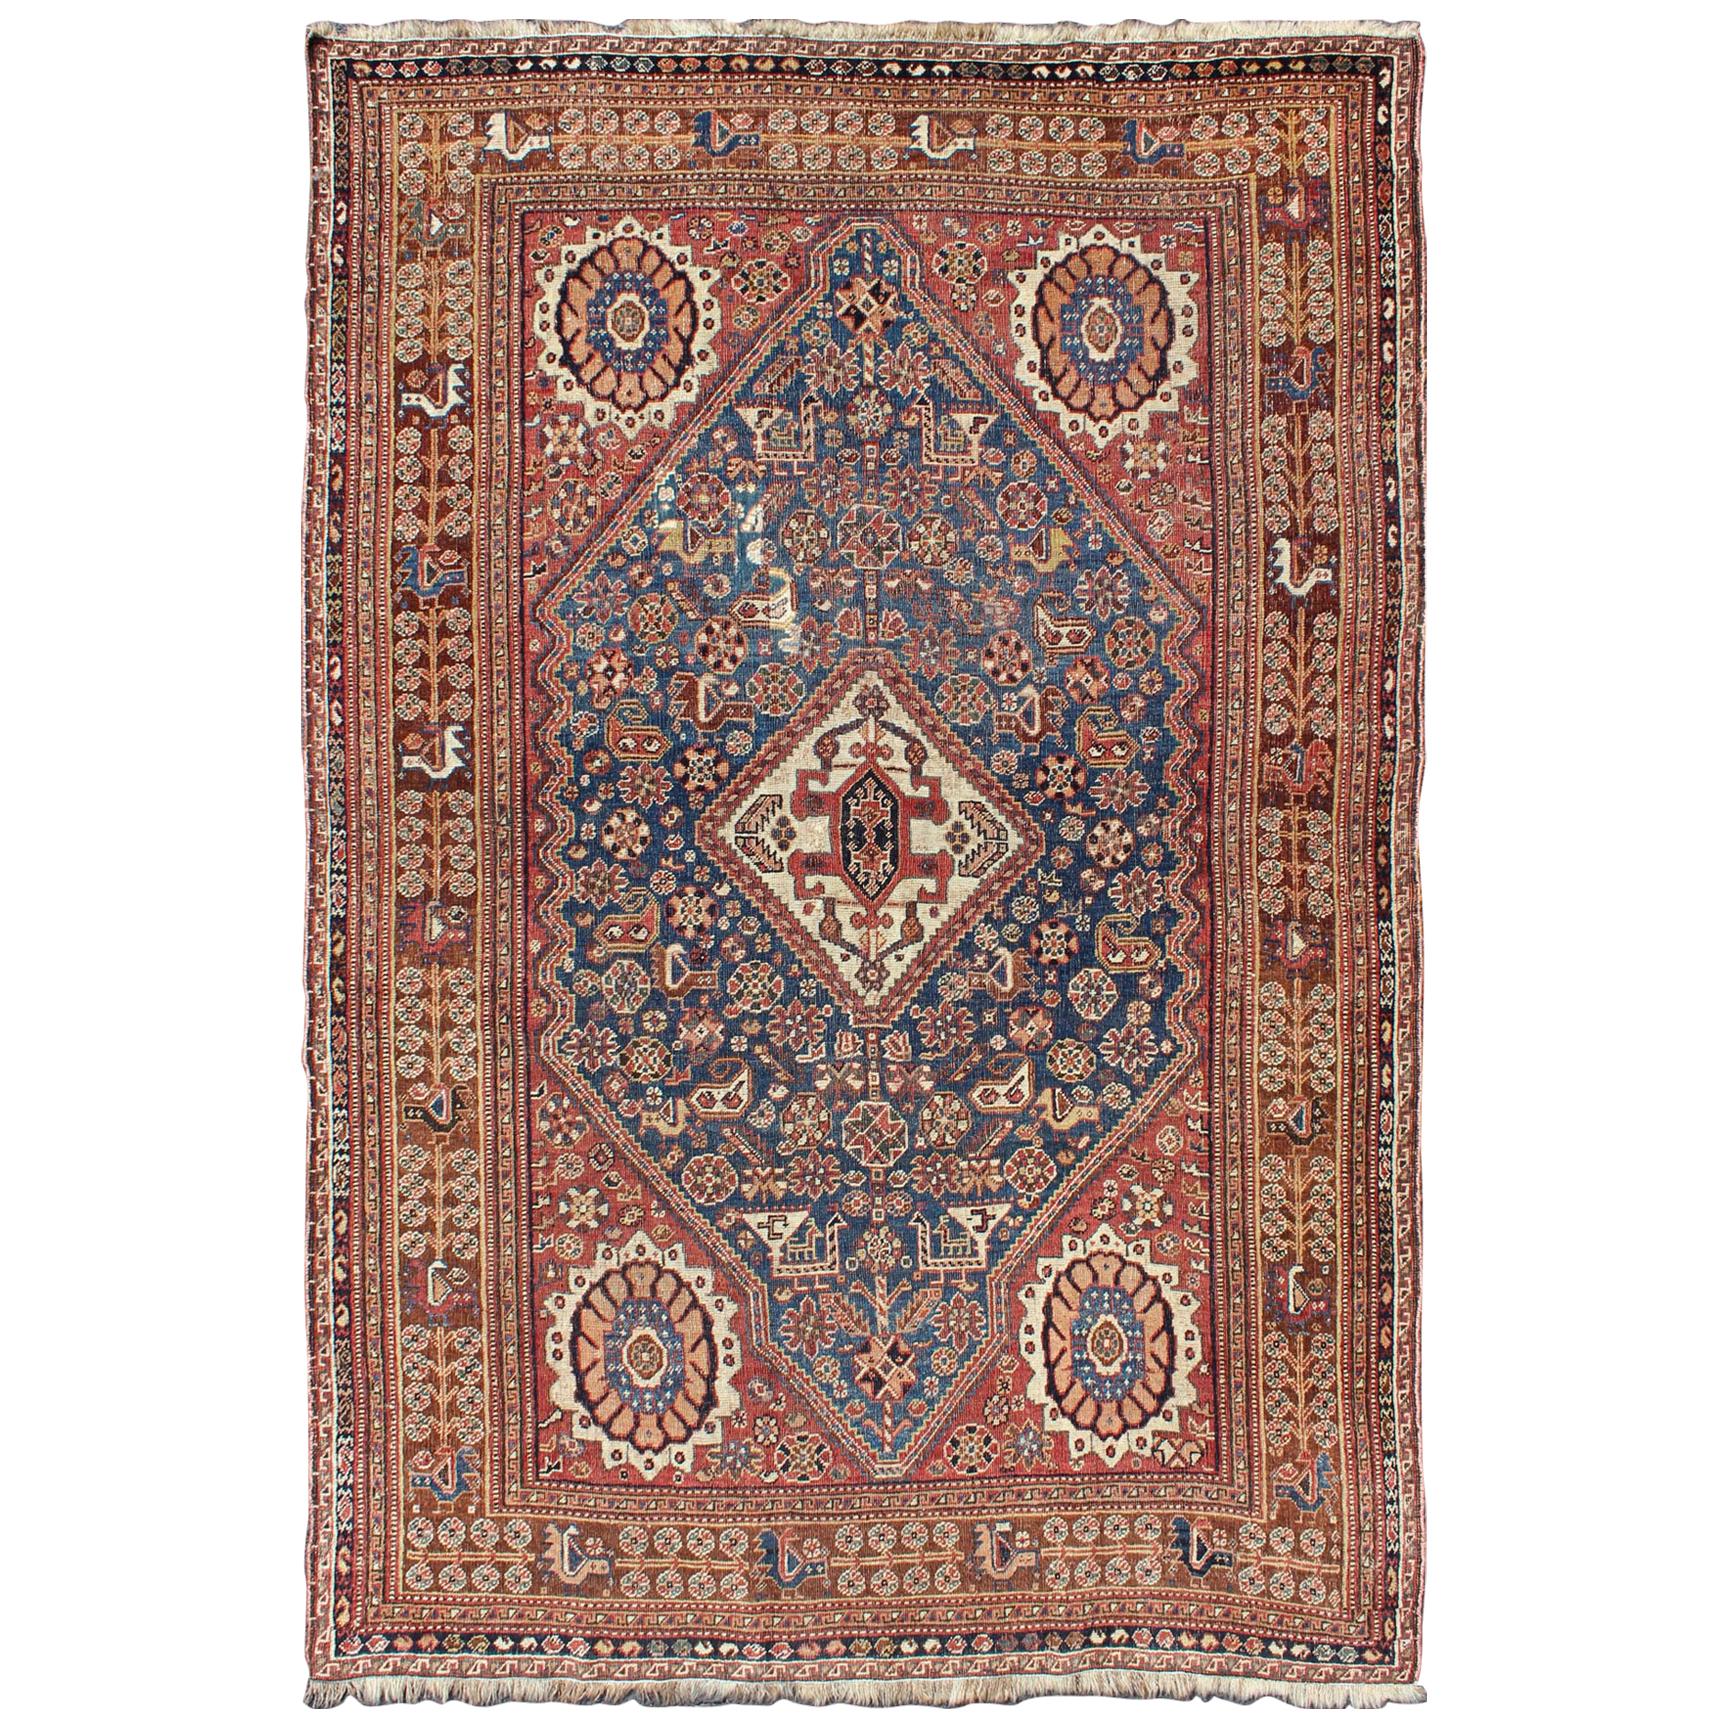 Antique Persian Qashqai Rug with Central Medallion in Ink Blue and Faded Red